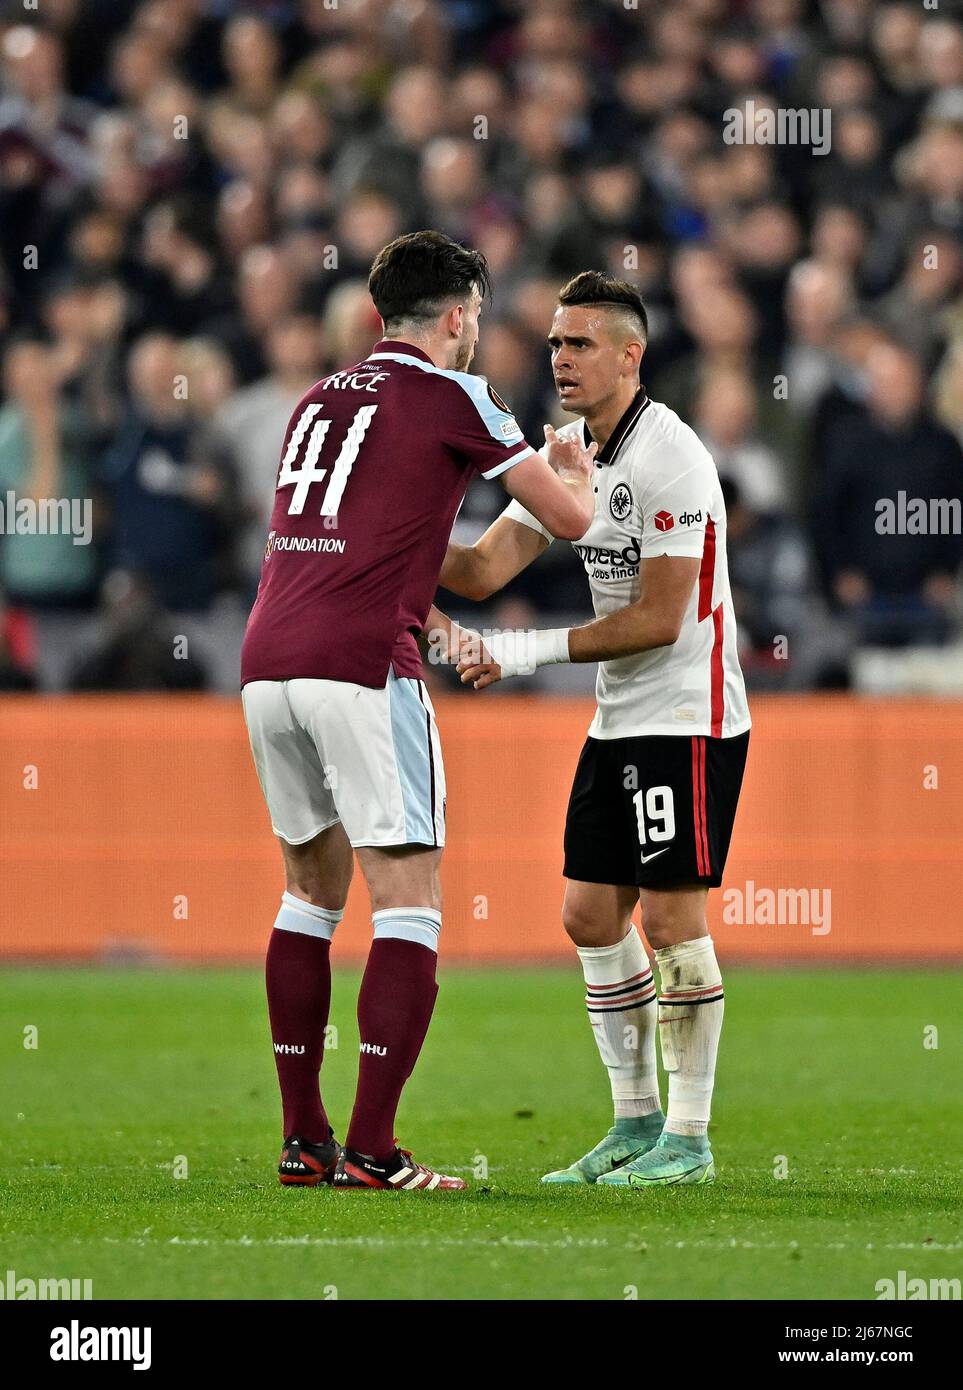 London UK 28th April 2022. Declan Rice (West Ham) and Rafael Santos Borre (Frankfurt) have words during the West Ham vs Eintracht Frankfurt Uefa Europa Cup semi final 1st leg match at the London Stadium, Stratford.Credit: Martin Dalton/Alamy Live News. This Image is for EDITORIAL USE ONLY. Licence required from the the Football DataCo for any other use. Credit: MARTIN DALTON/Alamy Live News Stock Photo